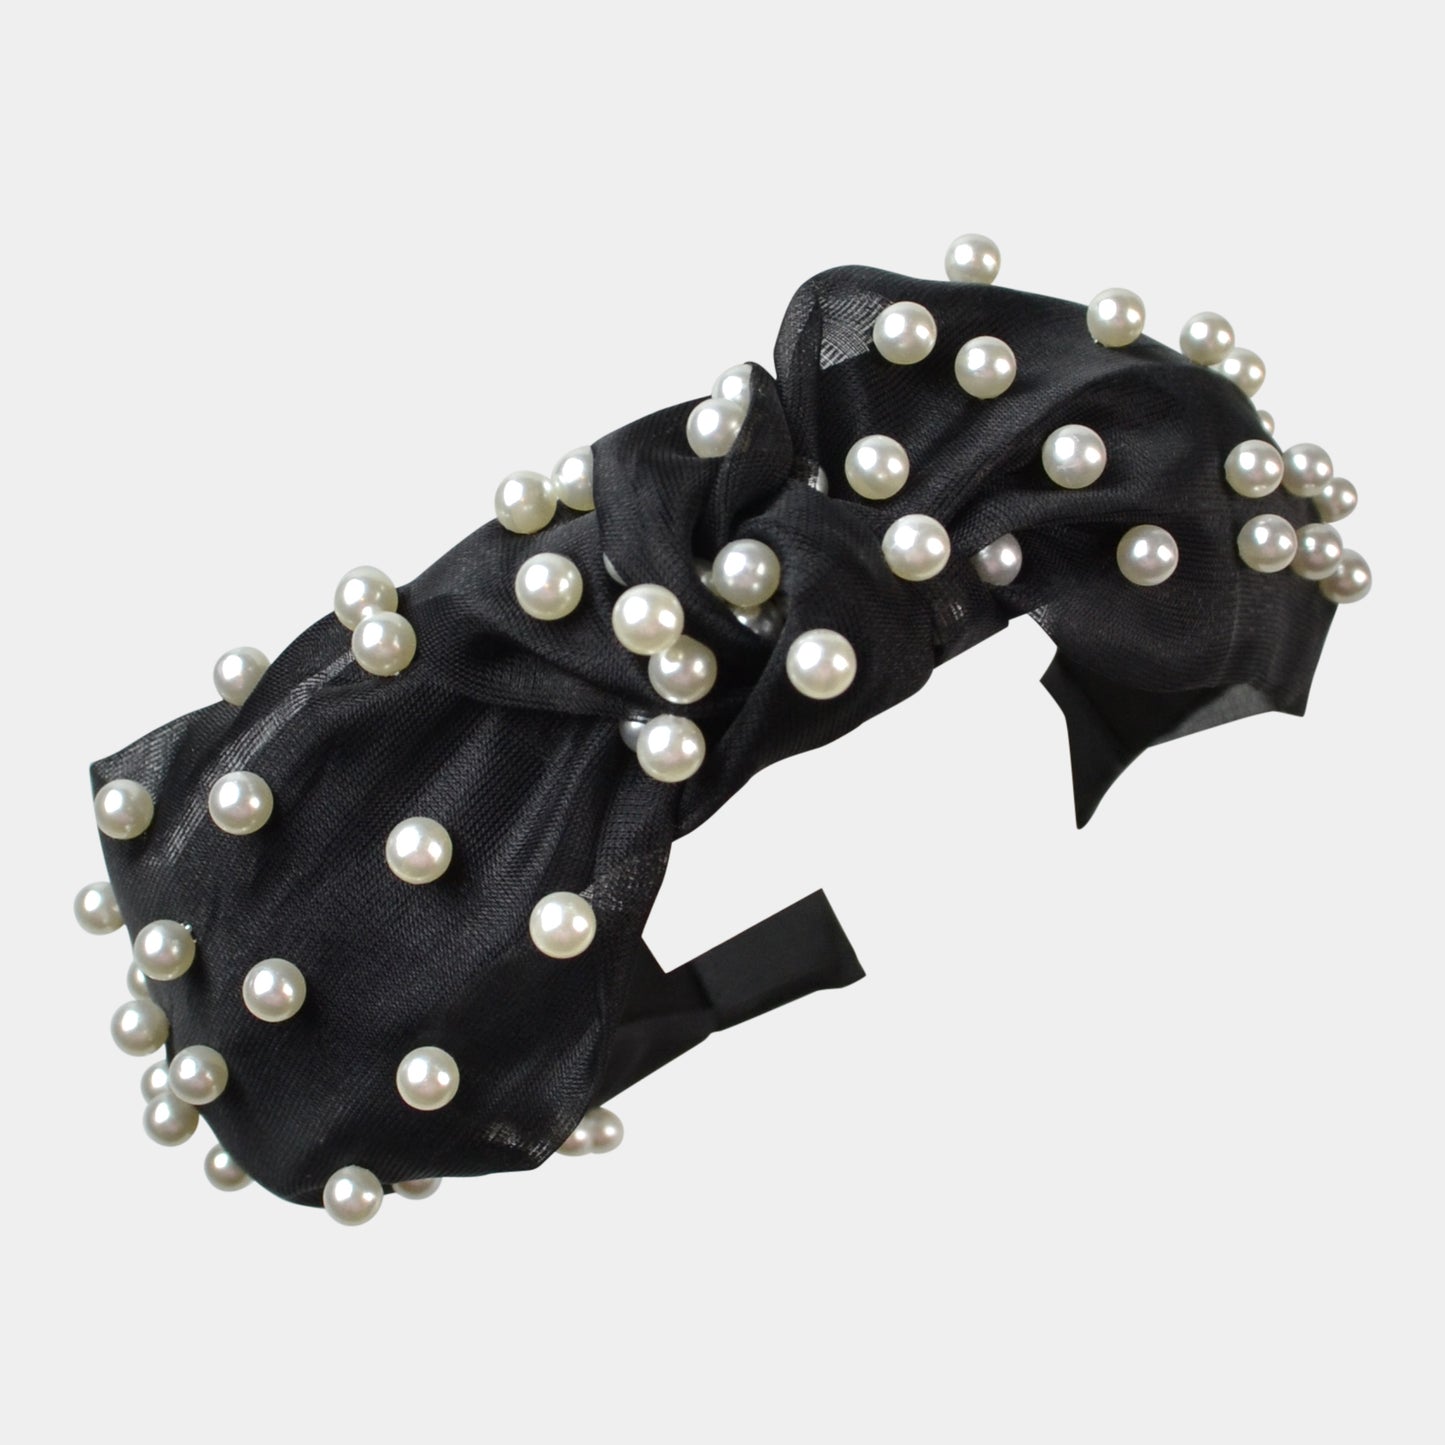 FASHION BY A STEP ABOVE HEADBAND IN BLACK WITH PEARLS